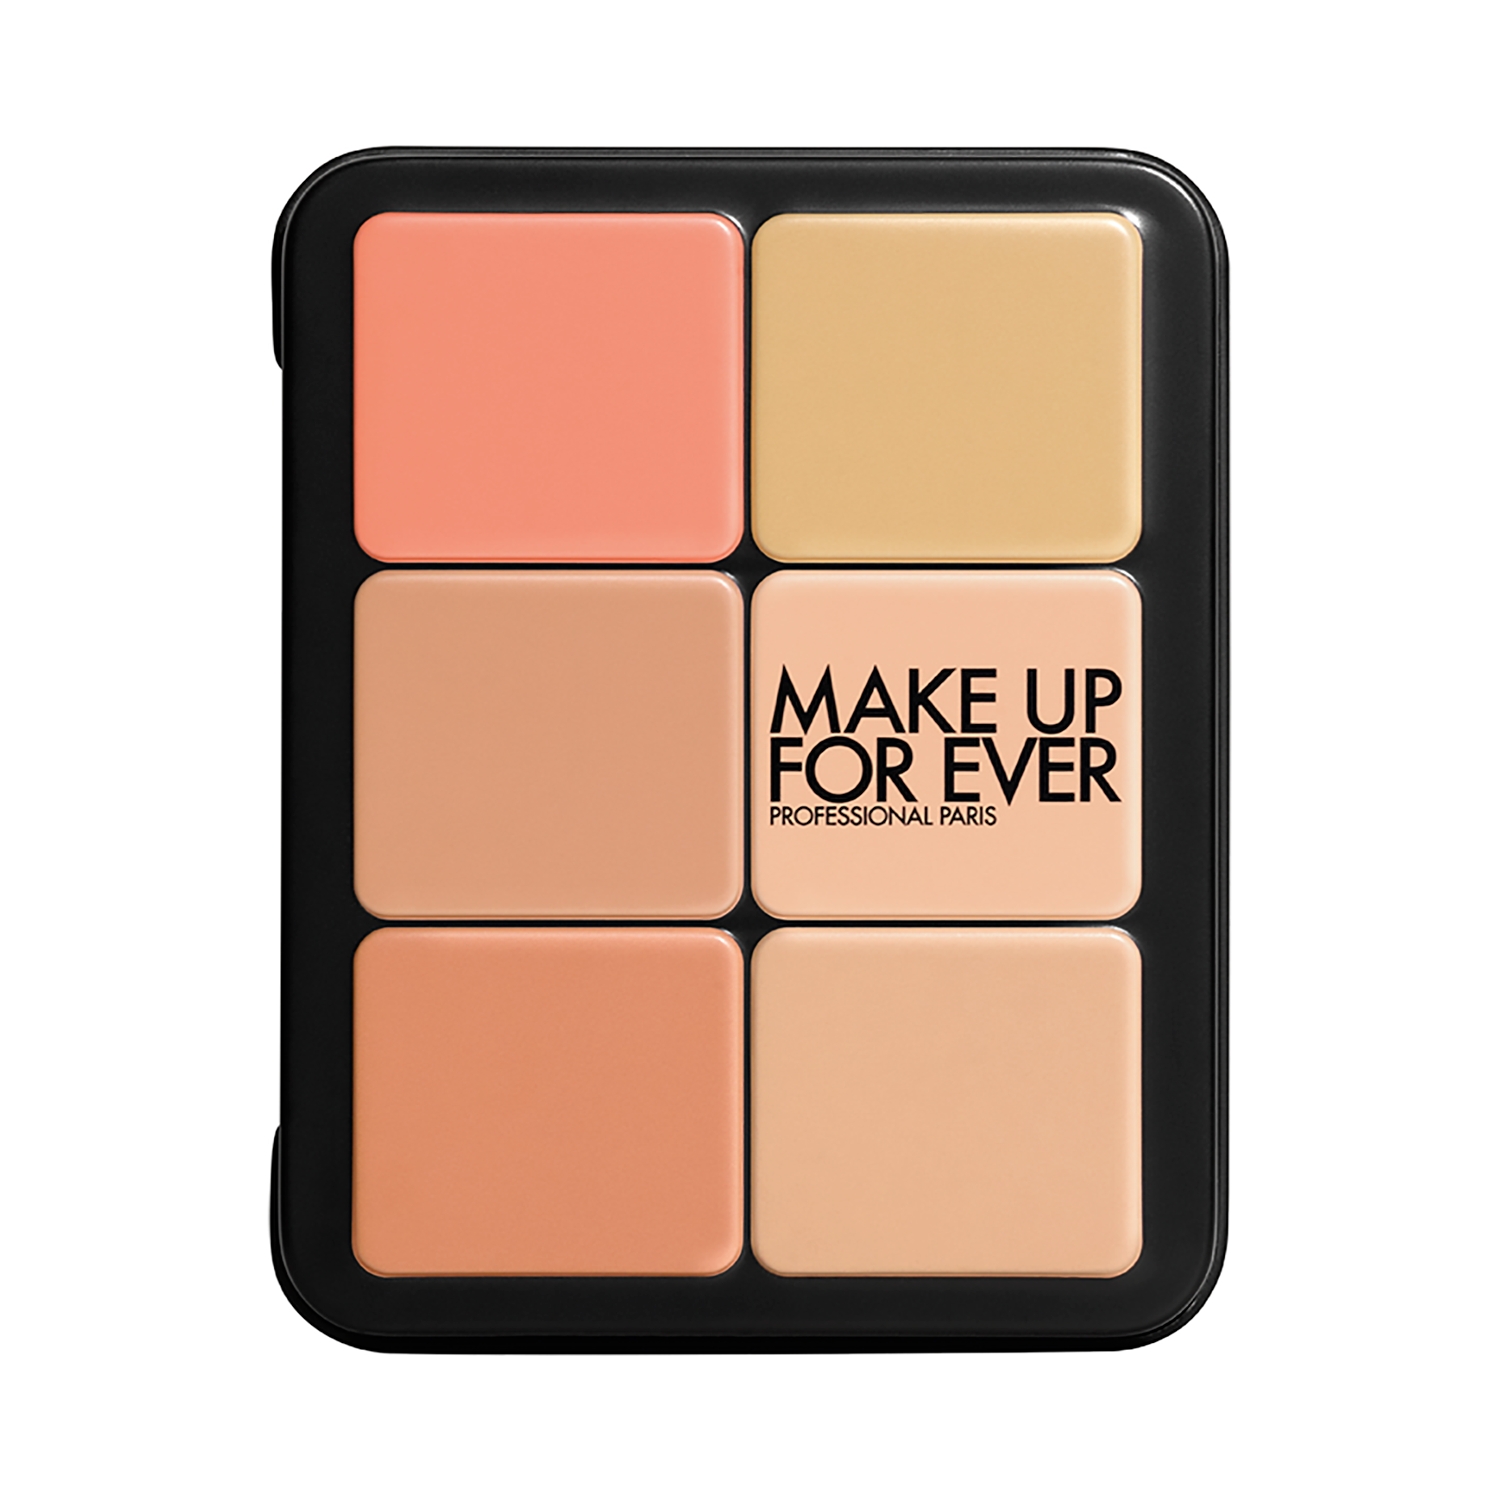 Make Up For Ever | Make Up For Ever HD Skin All-In-One Face Palette - 1 Harmony (26.5g)